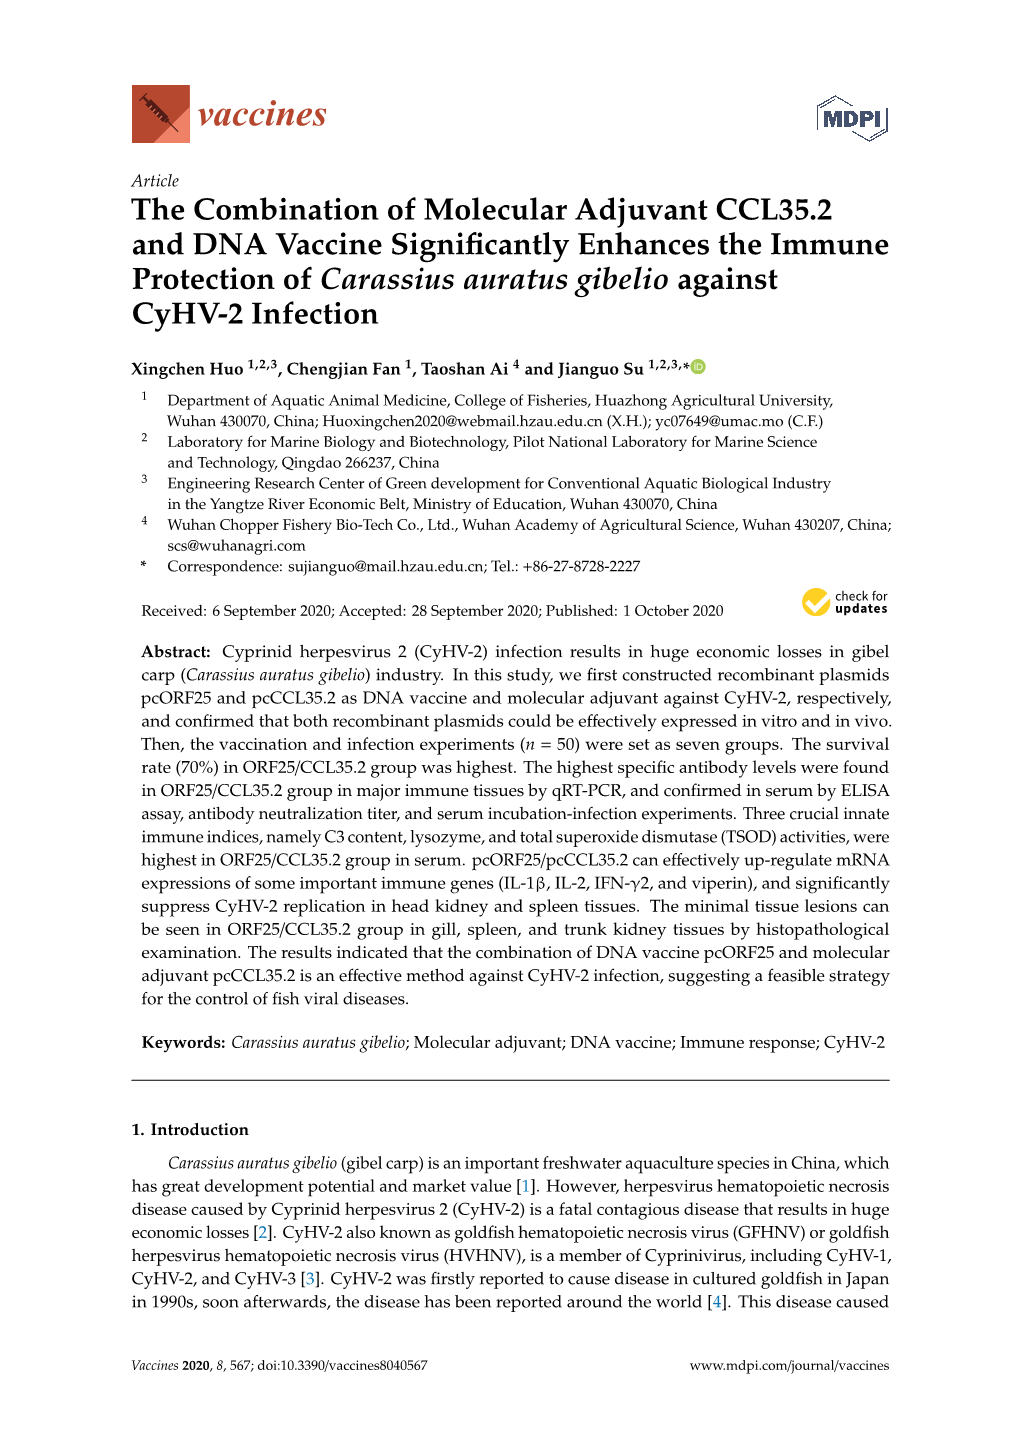 The Combination of Molecular Adjuvant CCL35.2 and DNA Vaccine Signiﬁcantly Enhances the Immune Protection of Carassius Auratus Gibelio Against Cyhv-2 Infection